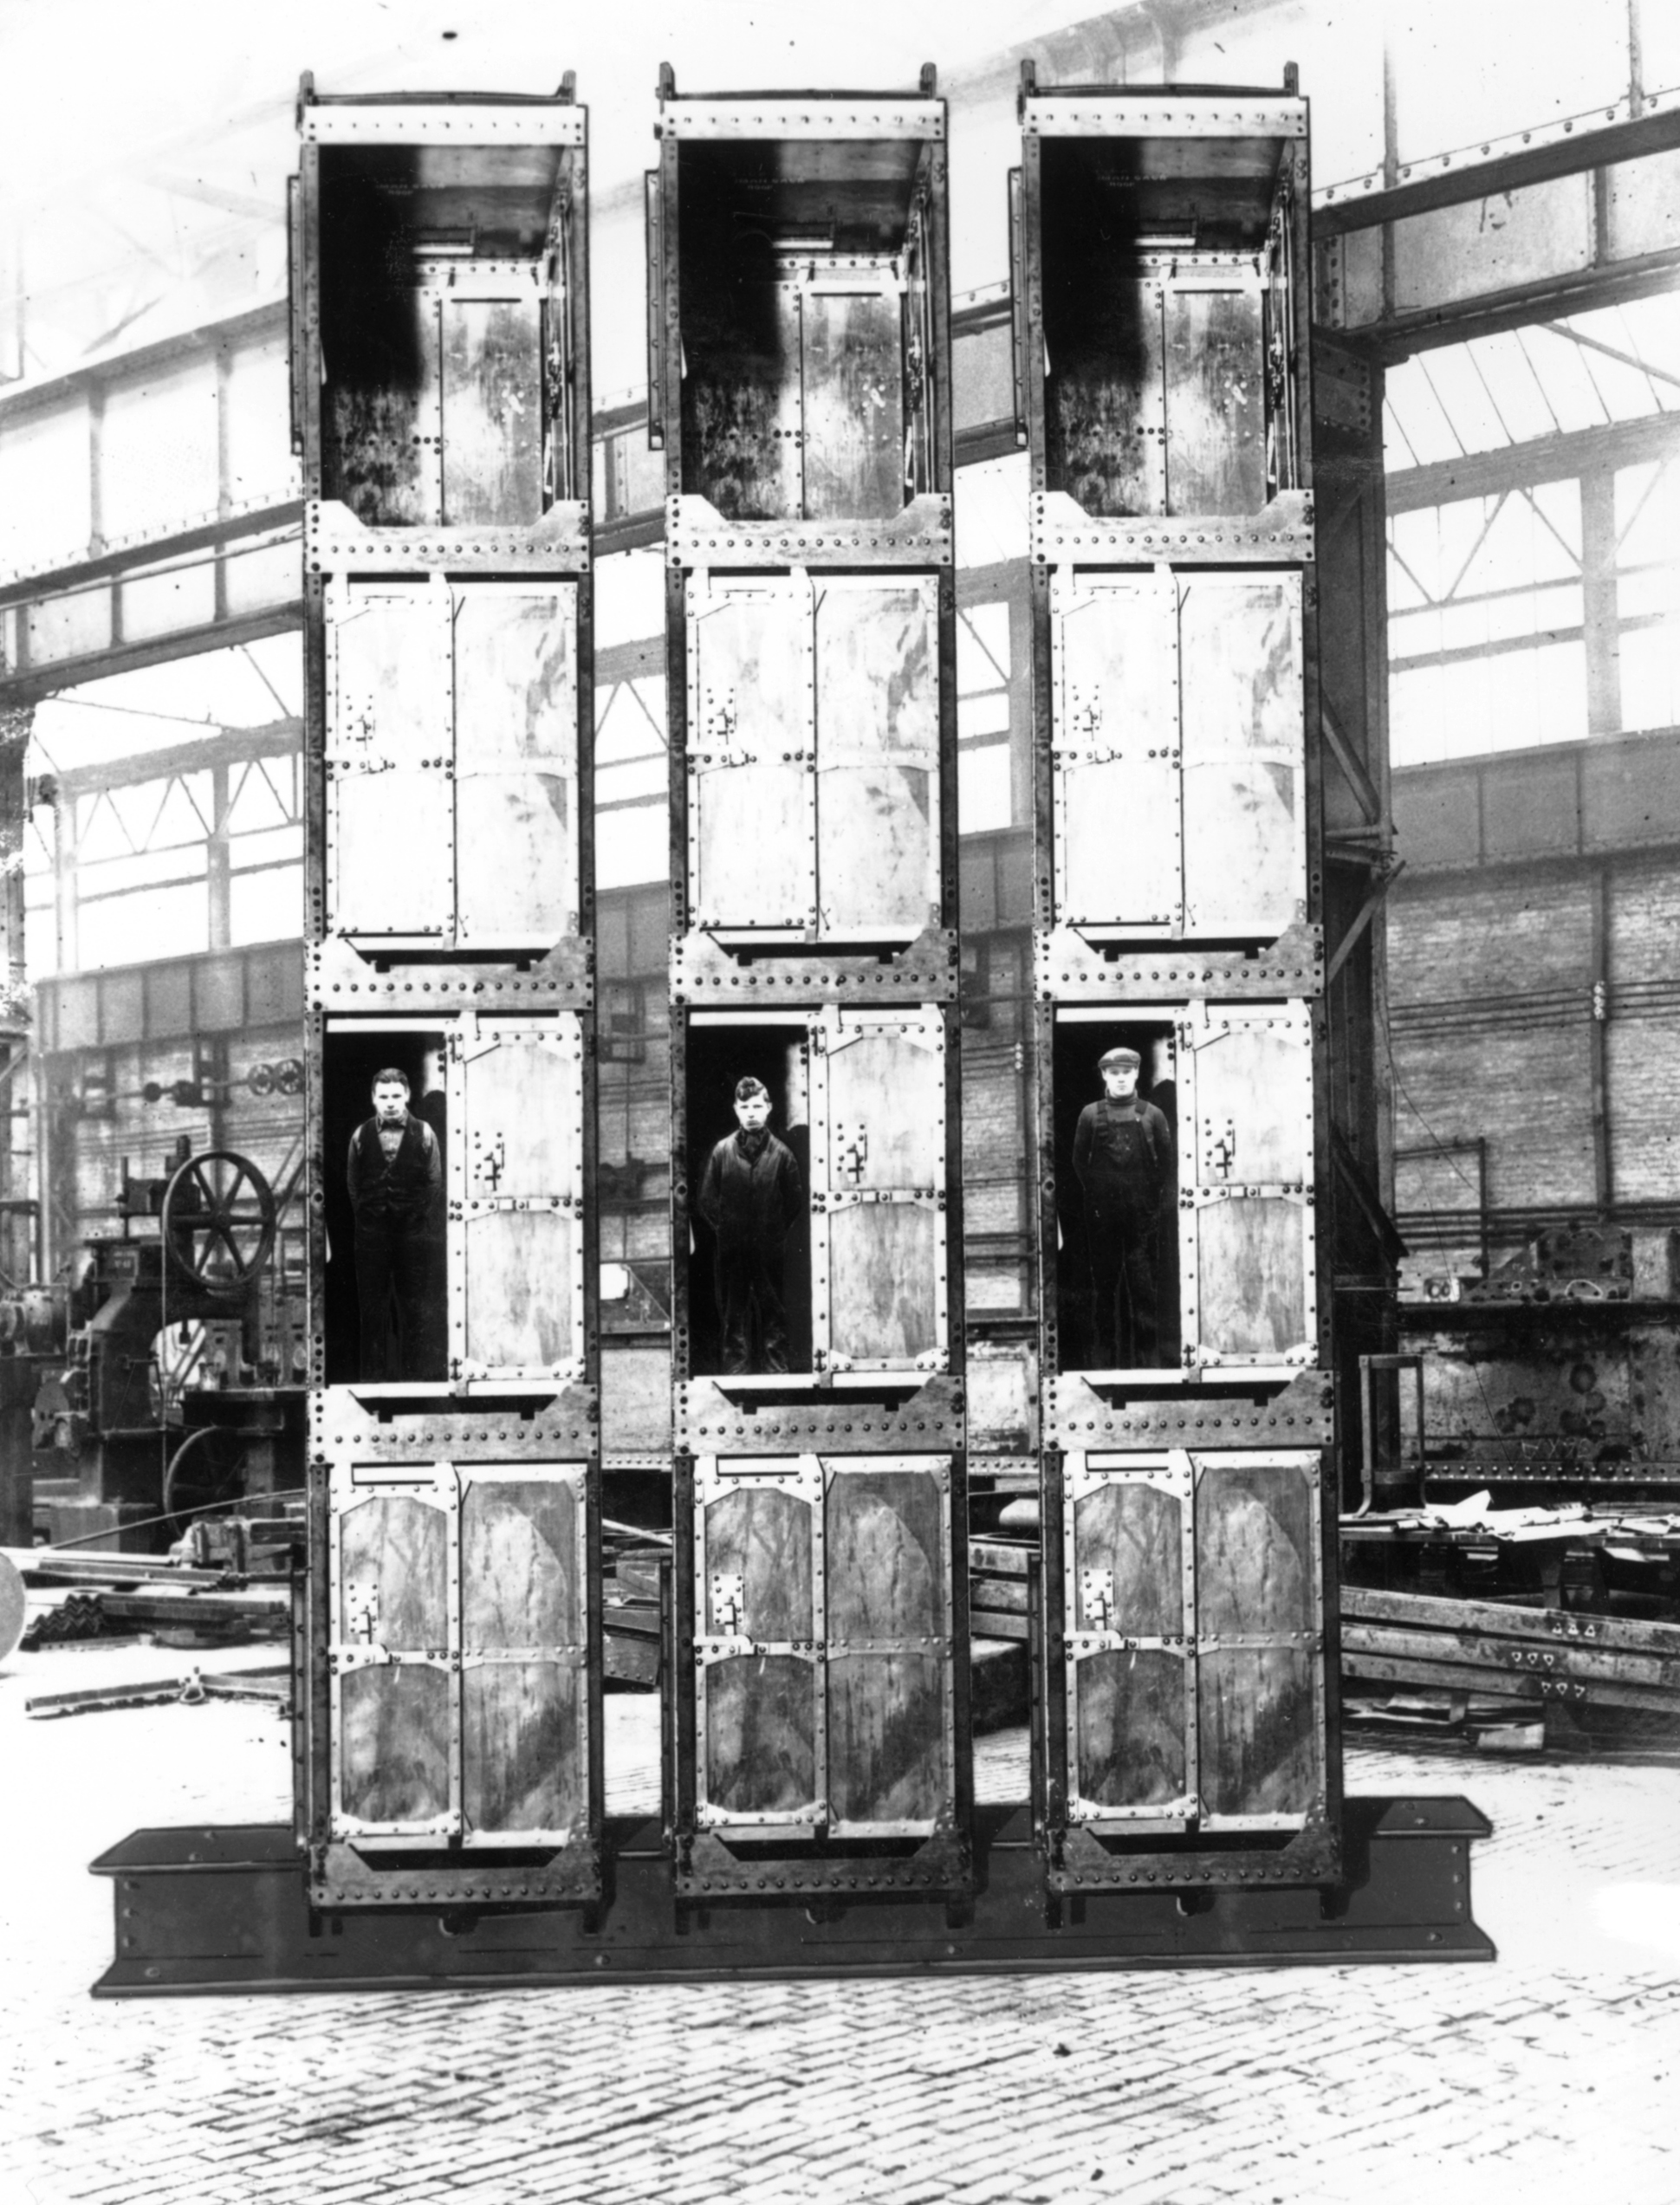 Man cages made by Vickers Armstrong, 1936. Courtesy of Tyne and Wear Archives and Museums